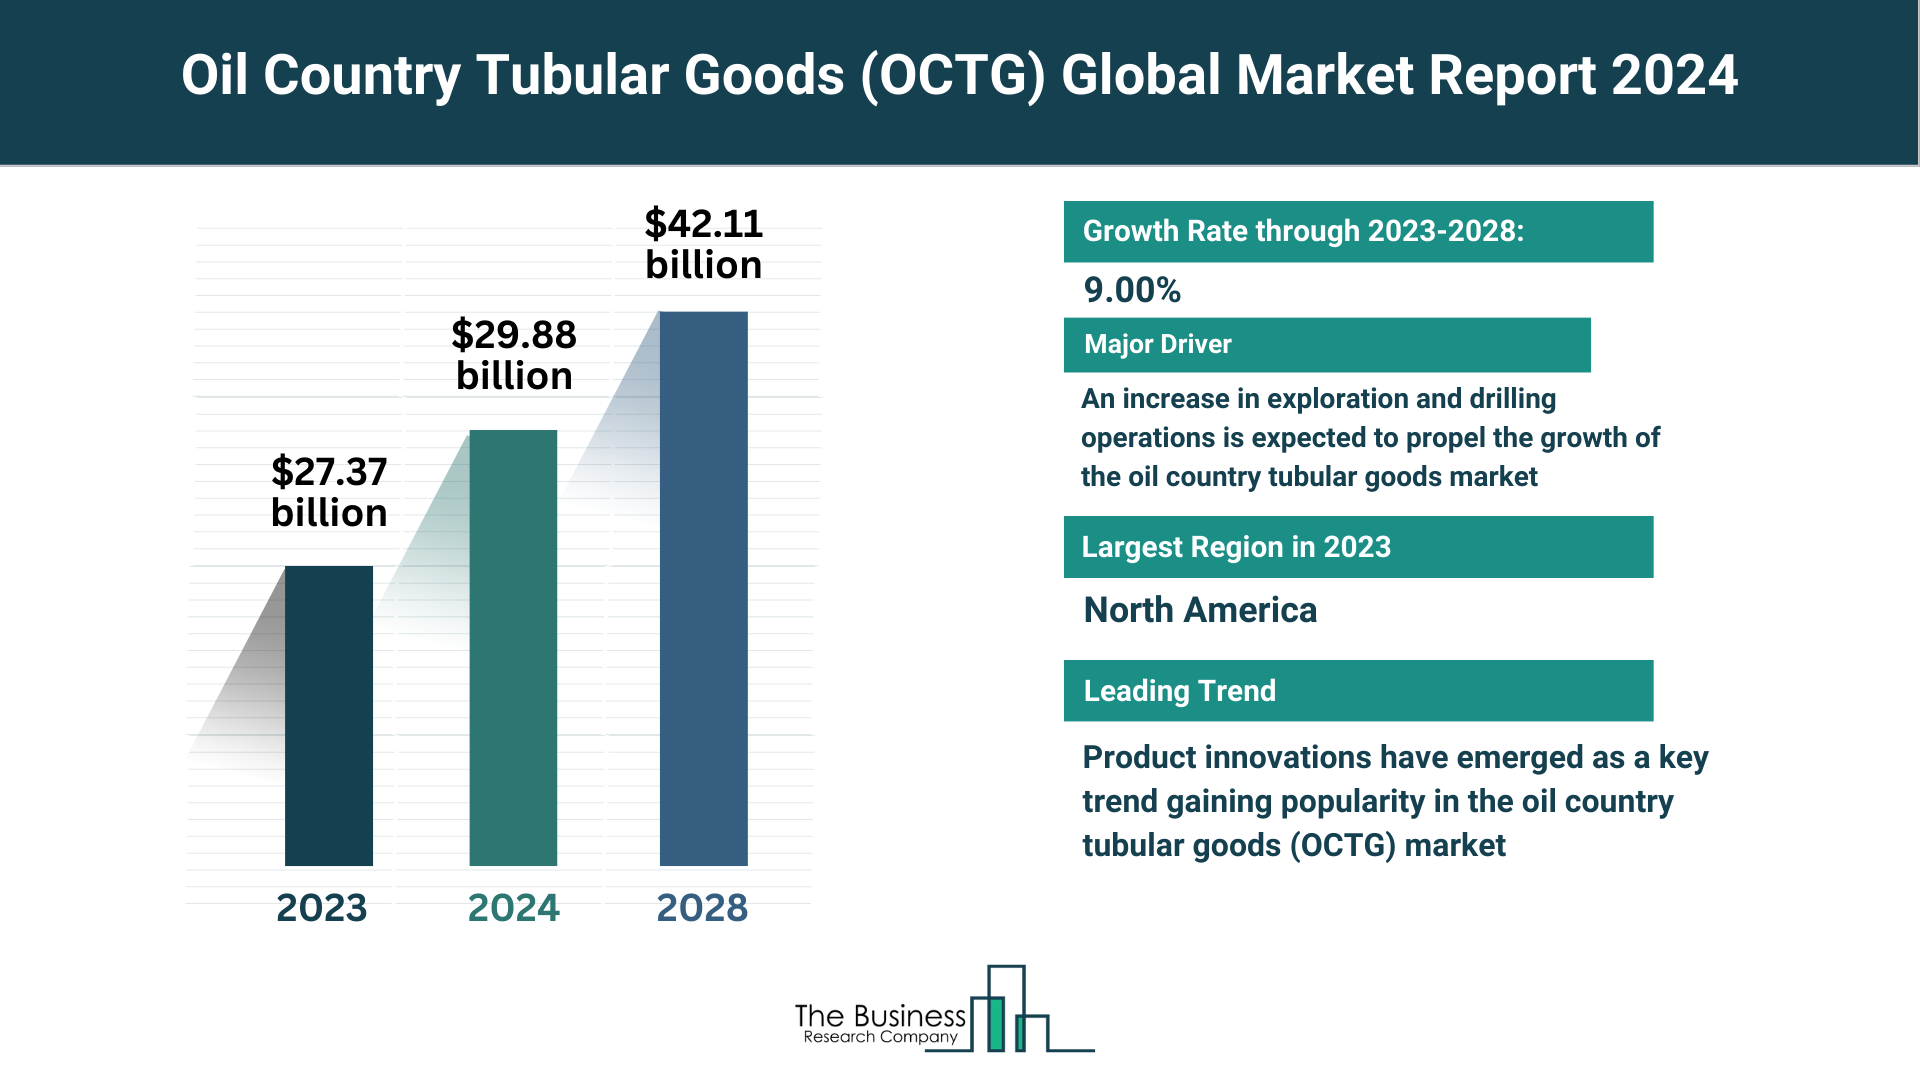 5 Key Takeaways From The Oil Country Tubular Goods (OCTG) Market Report 2024